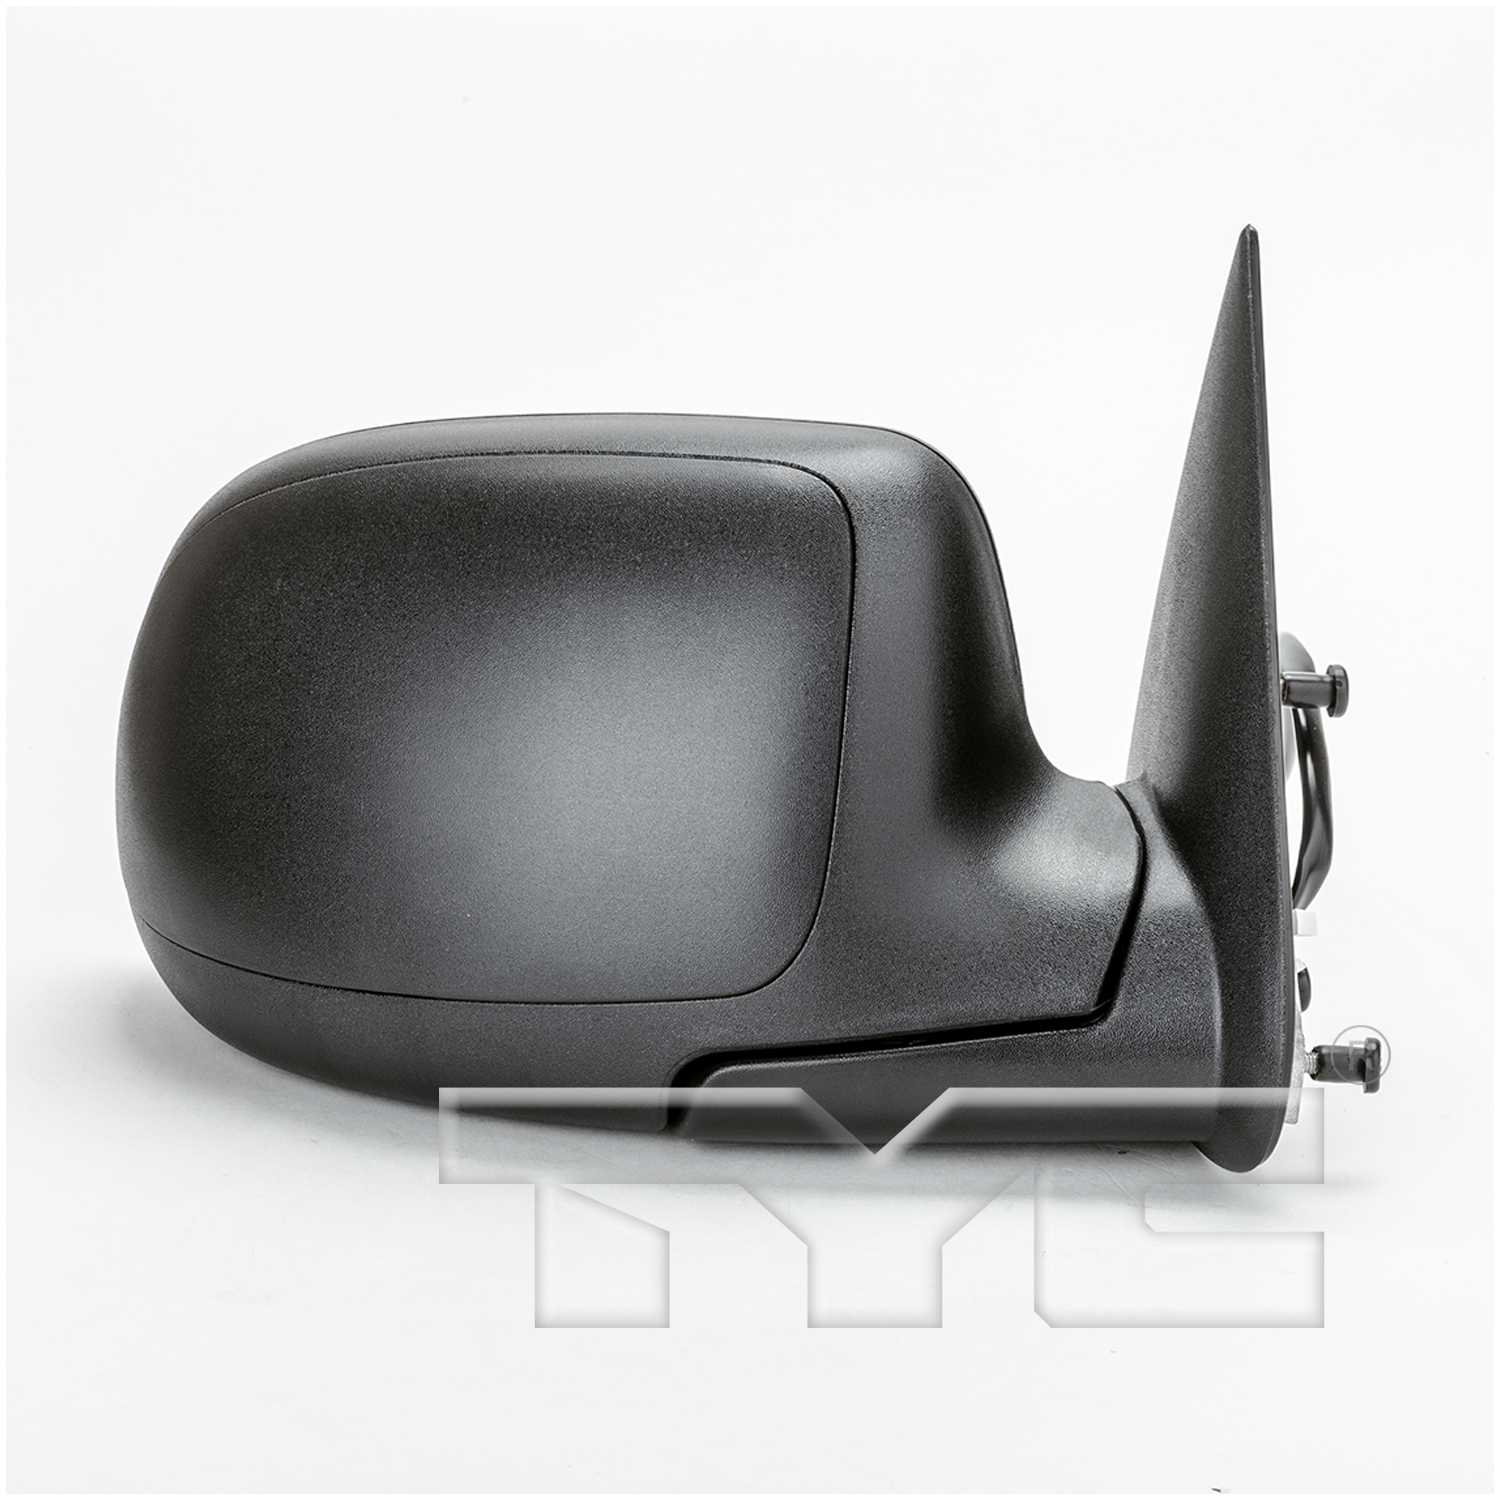 Aftermarket MIRRORS for GMC - SIERRA 1500 CLASSIC, SIERRA 1500 CLASSIC,07-07,RT Mirror outside rear view